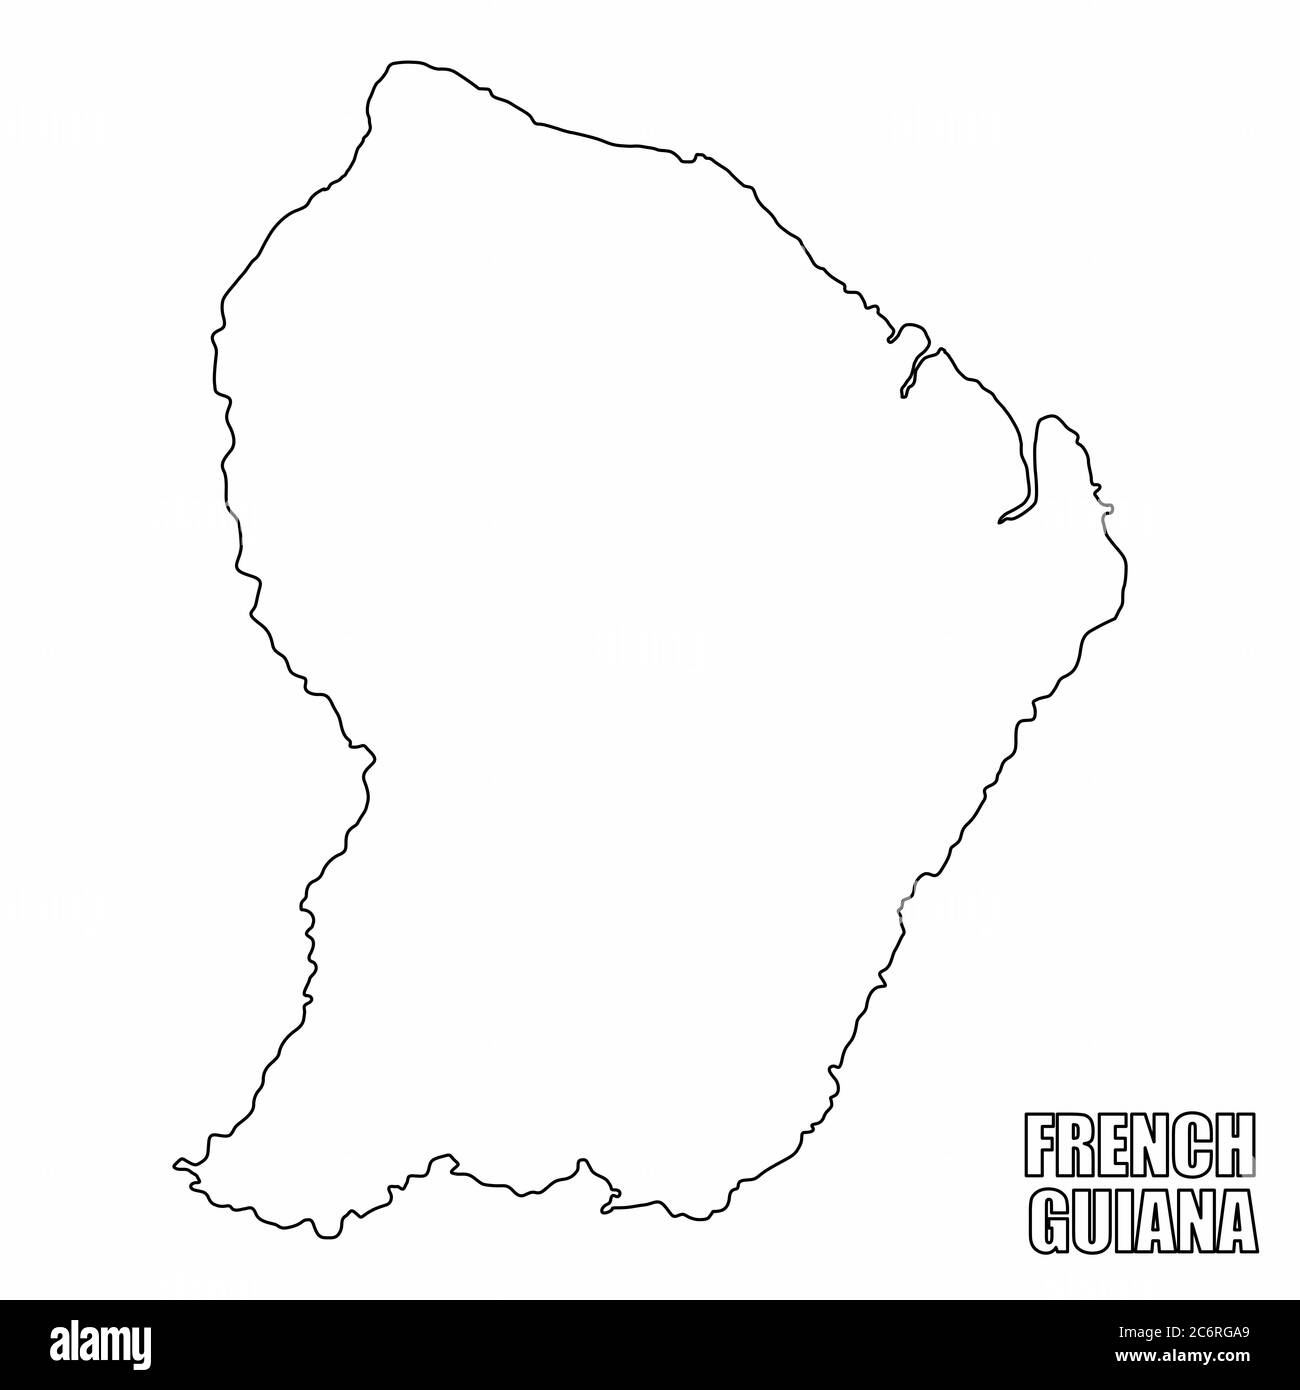 French Guiana outline map Stock Vector